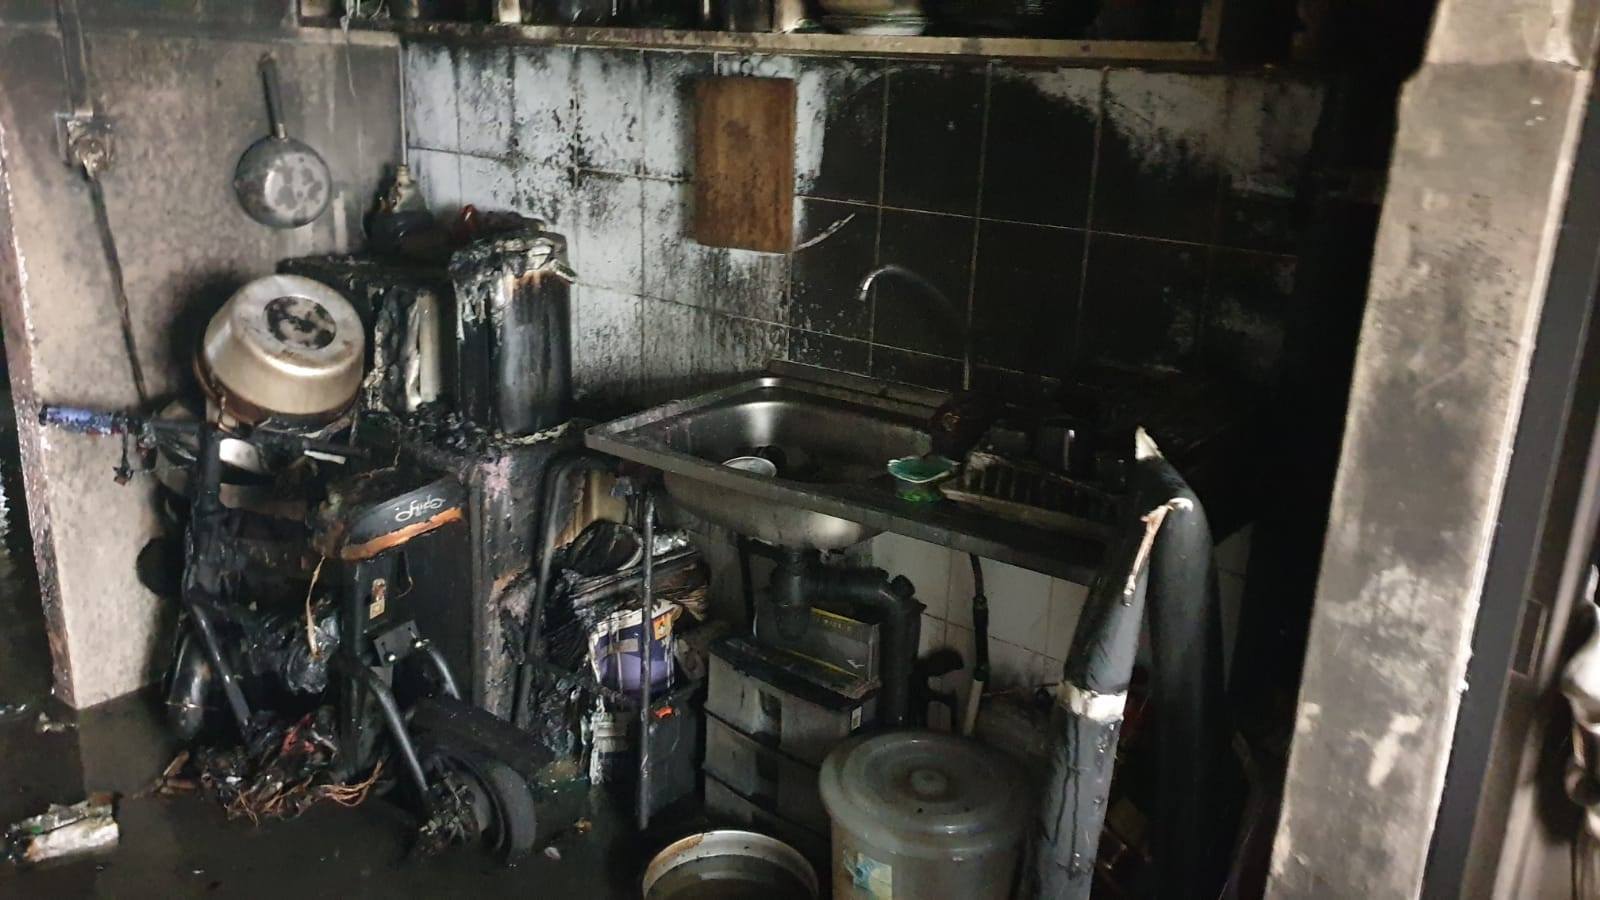 A personal mobility device placed in the kitchen of an Ang Mo Kio flat that had been razed by a fire. (Photo: Facebook/SCDF)